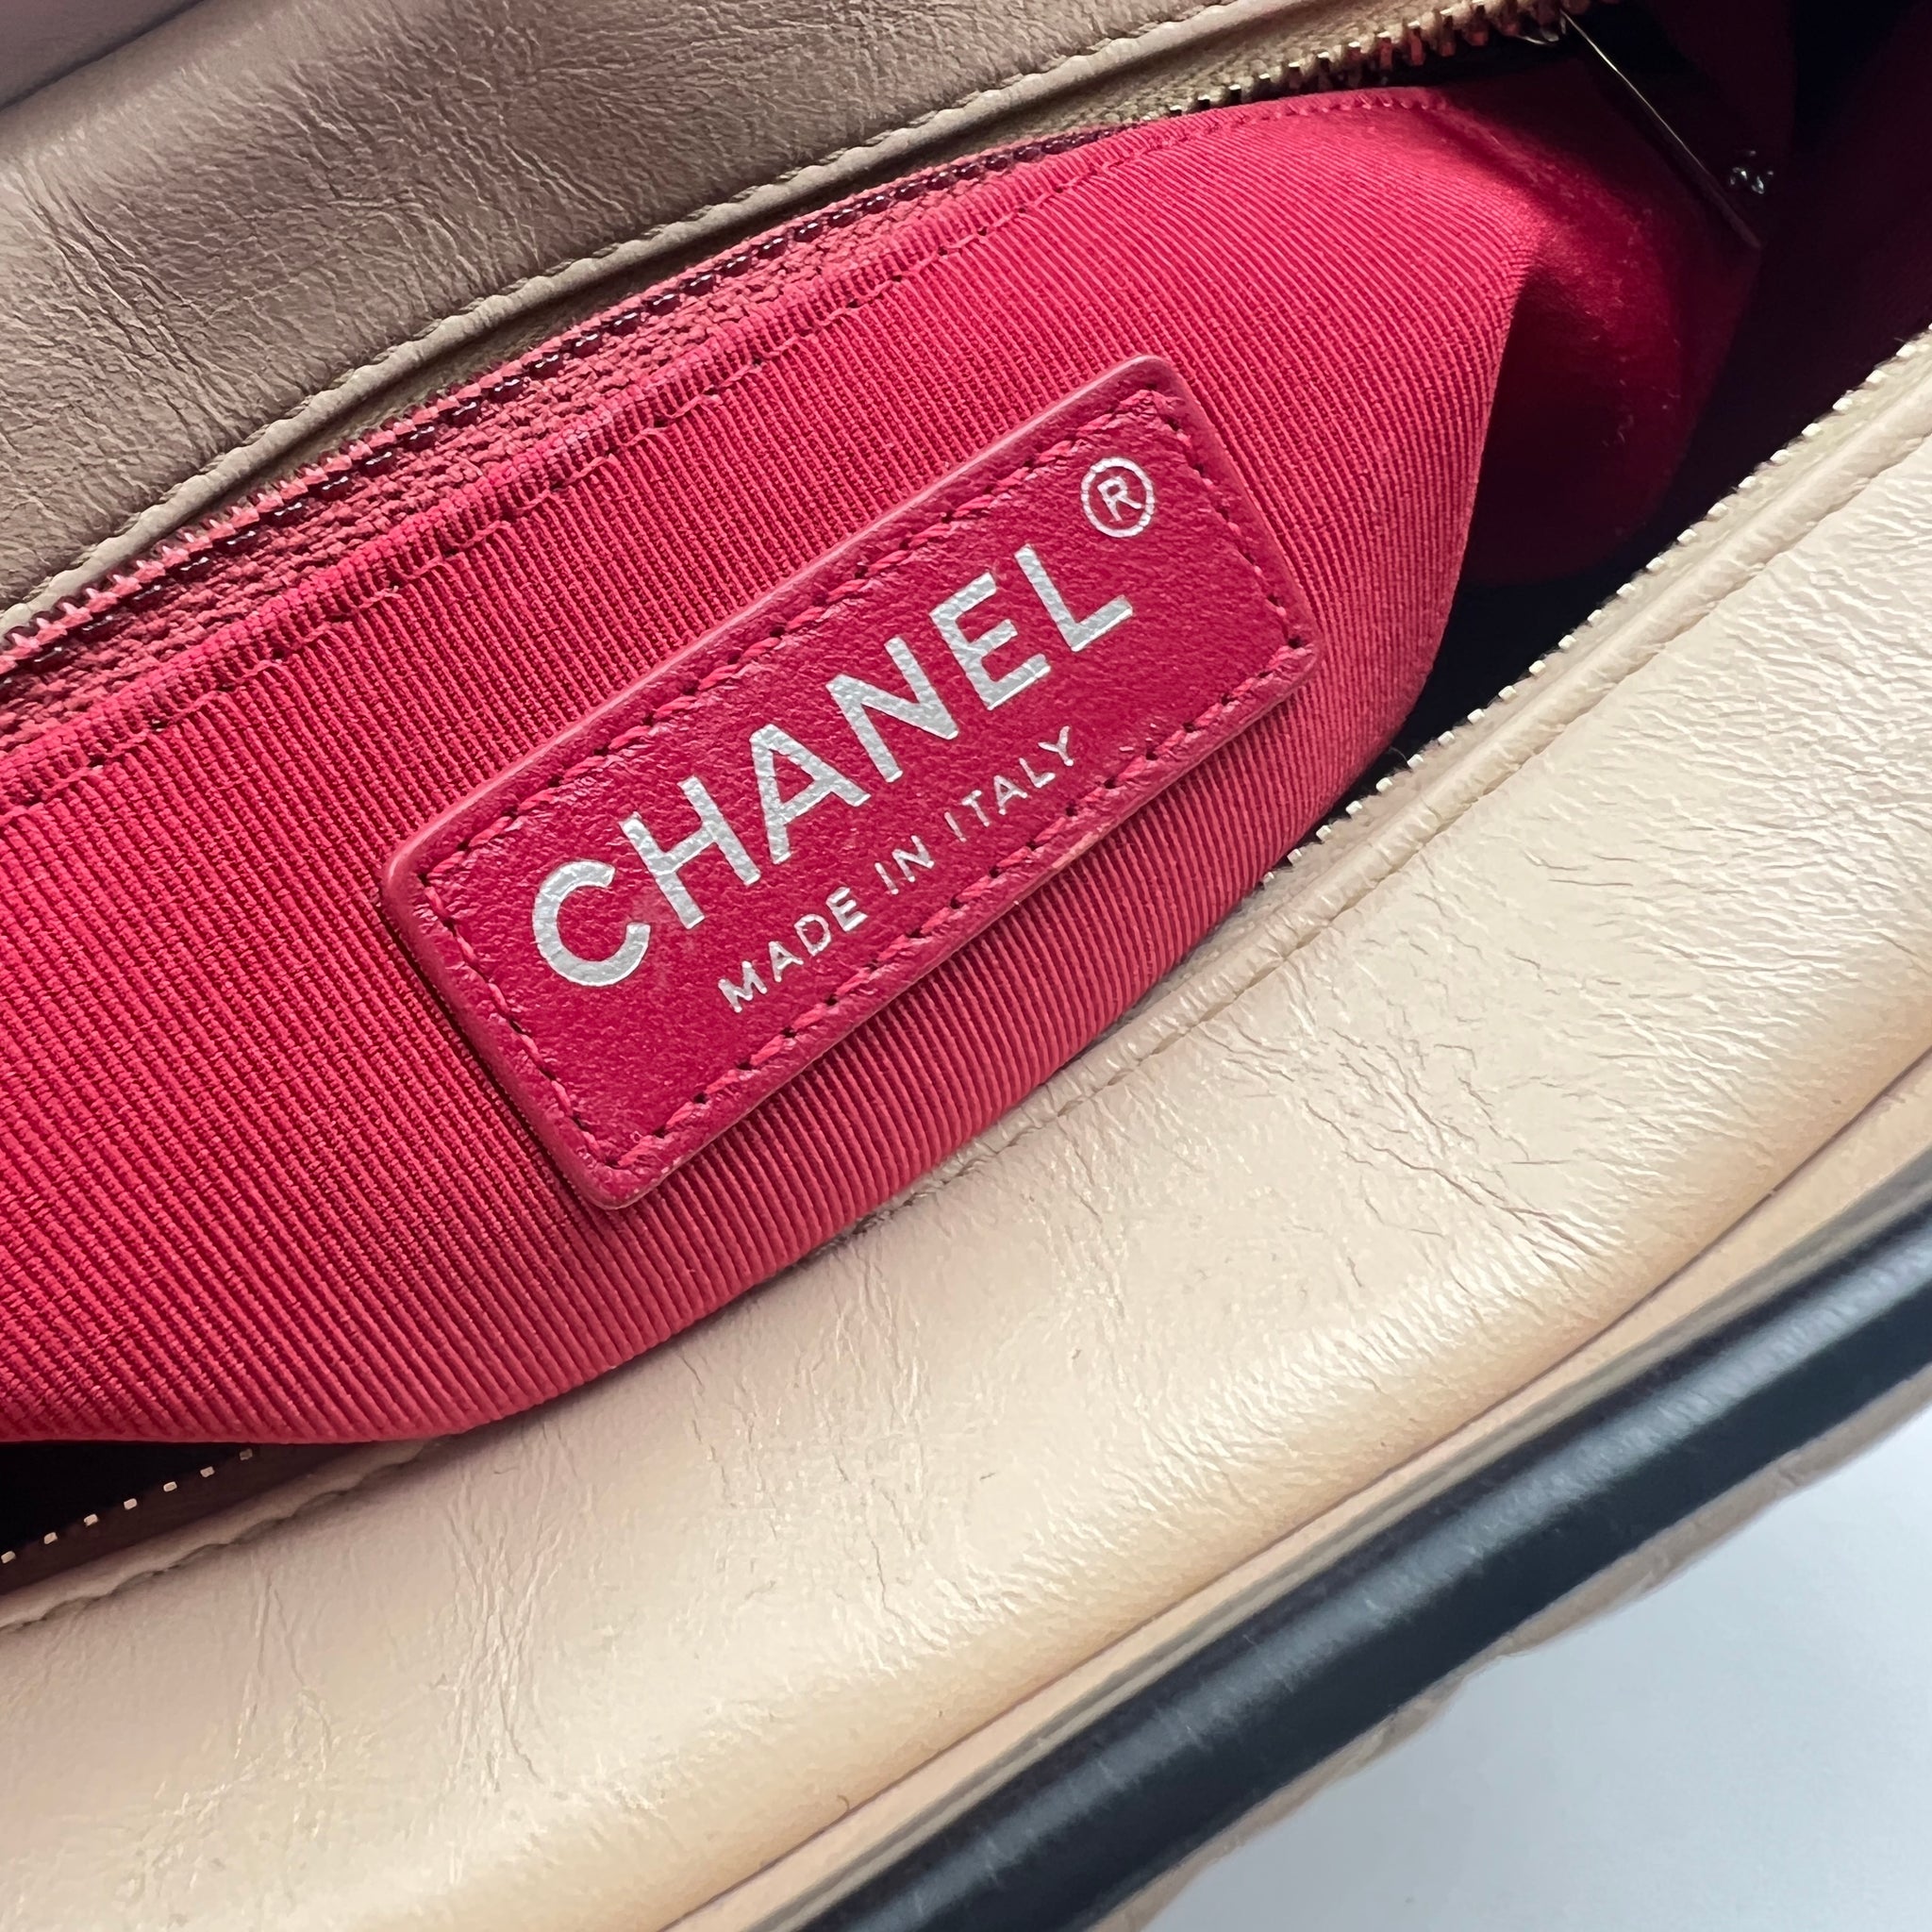 Chanel gabrielle hobo bag, Gallery posted by banyu_yi